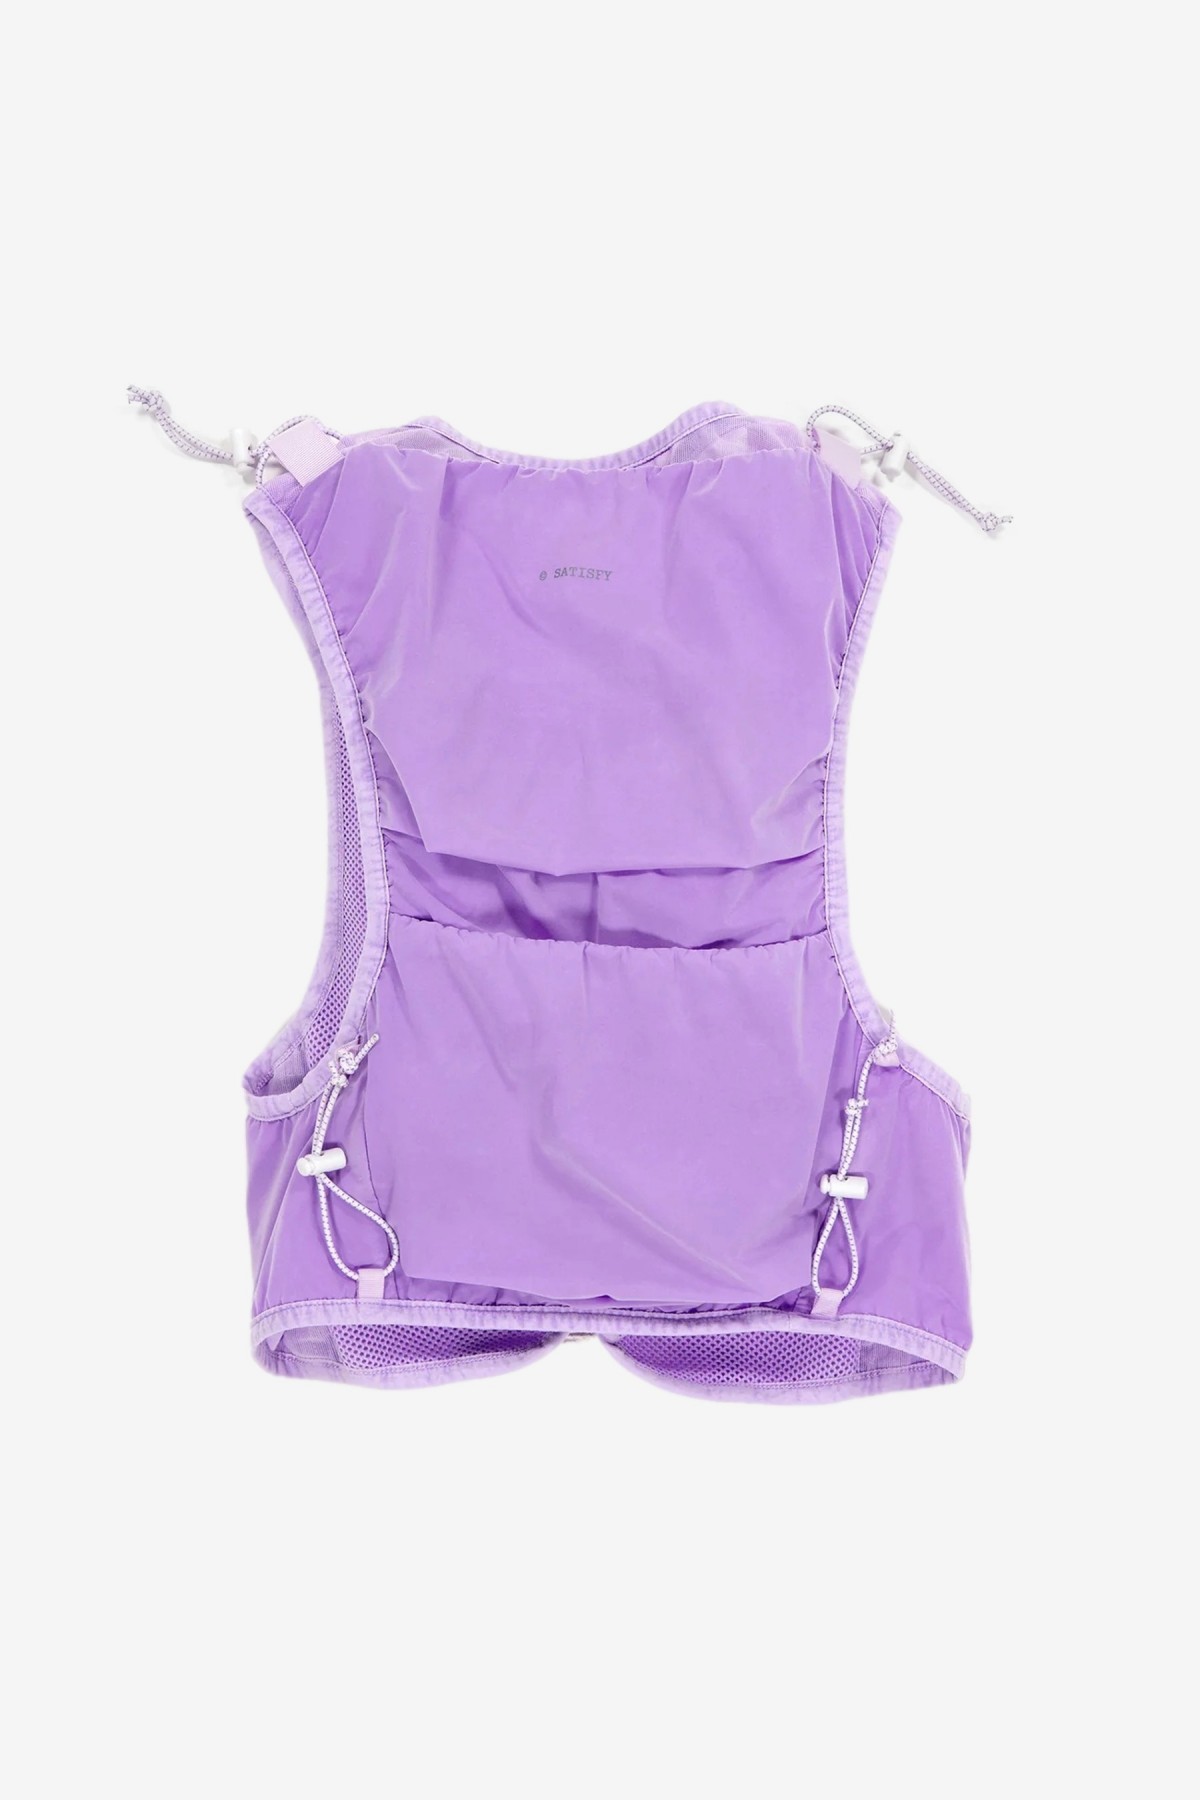 Satisfy Running Justice Cordura Hydration Vest 5L in Mineral Lilac